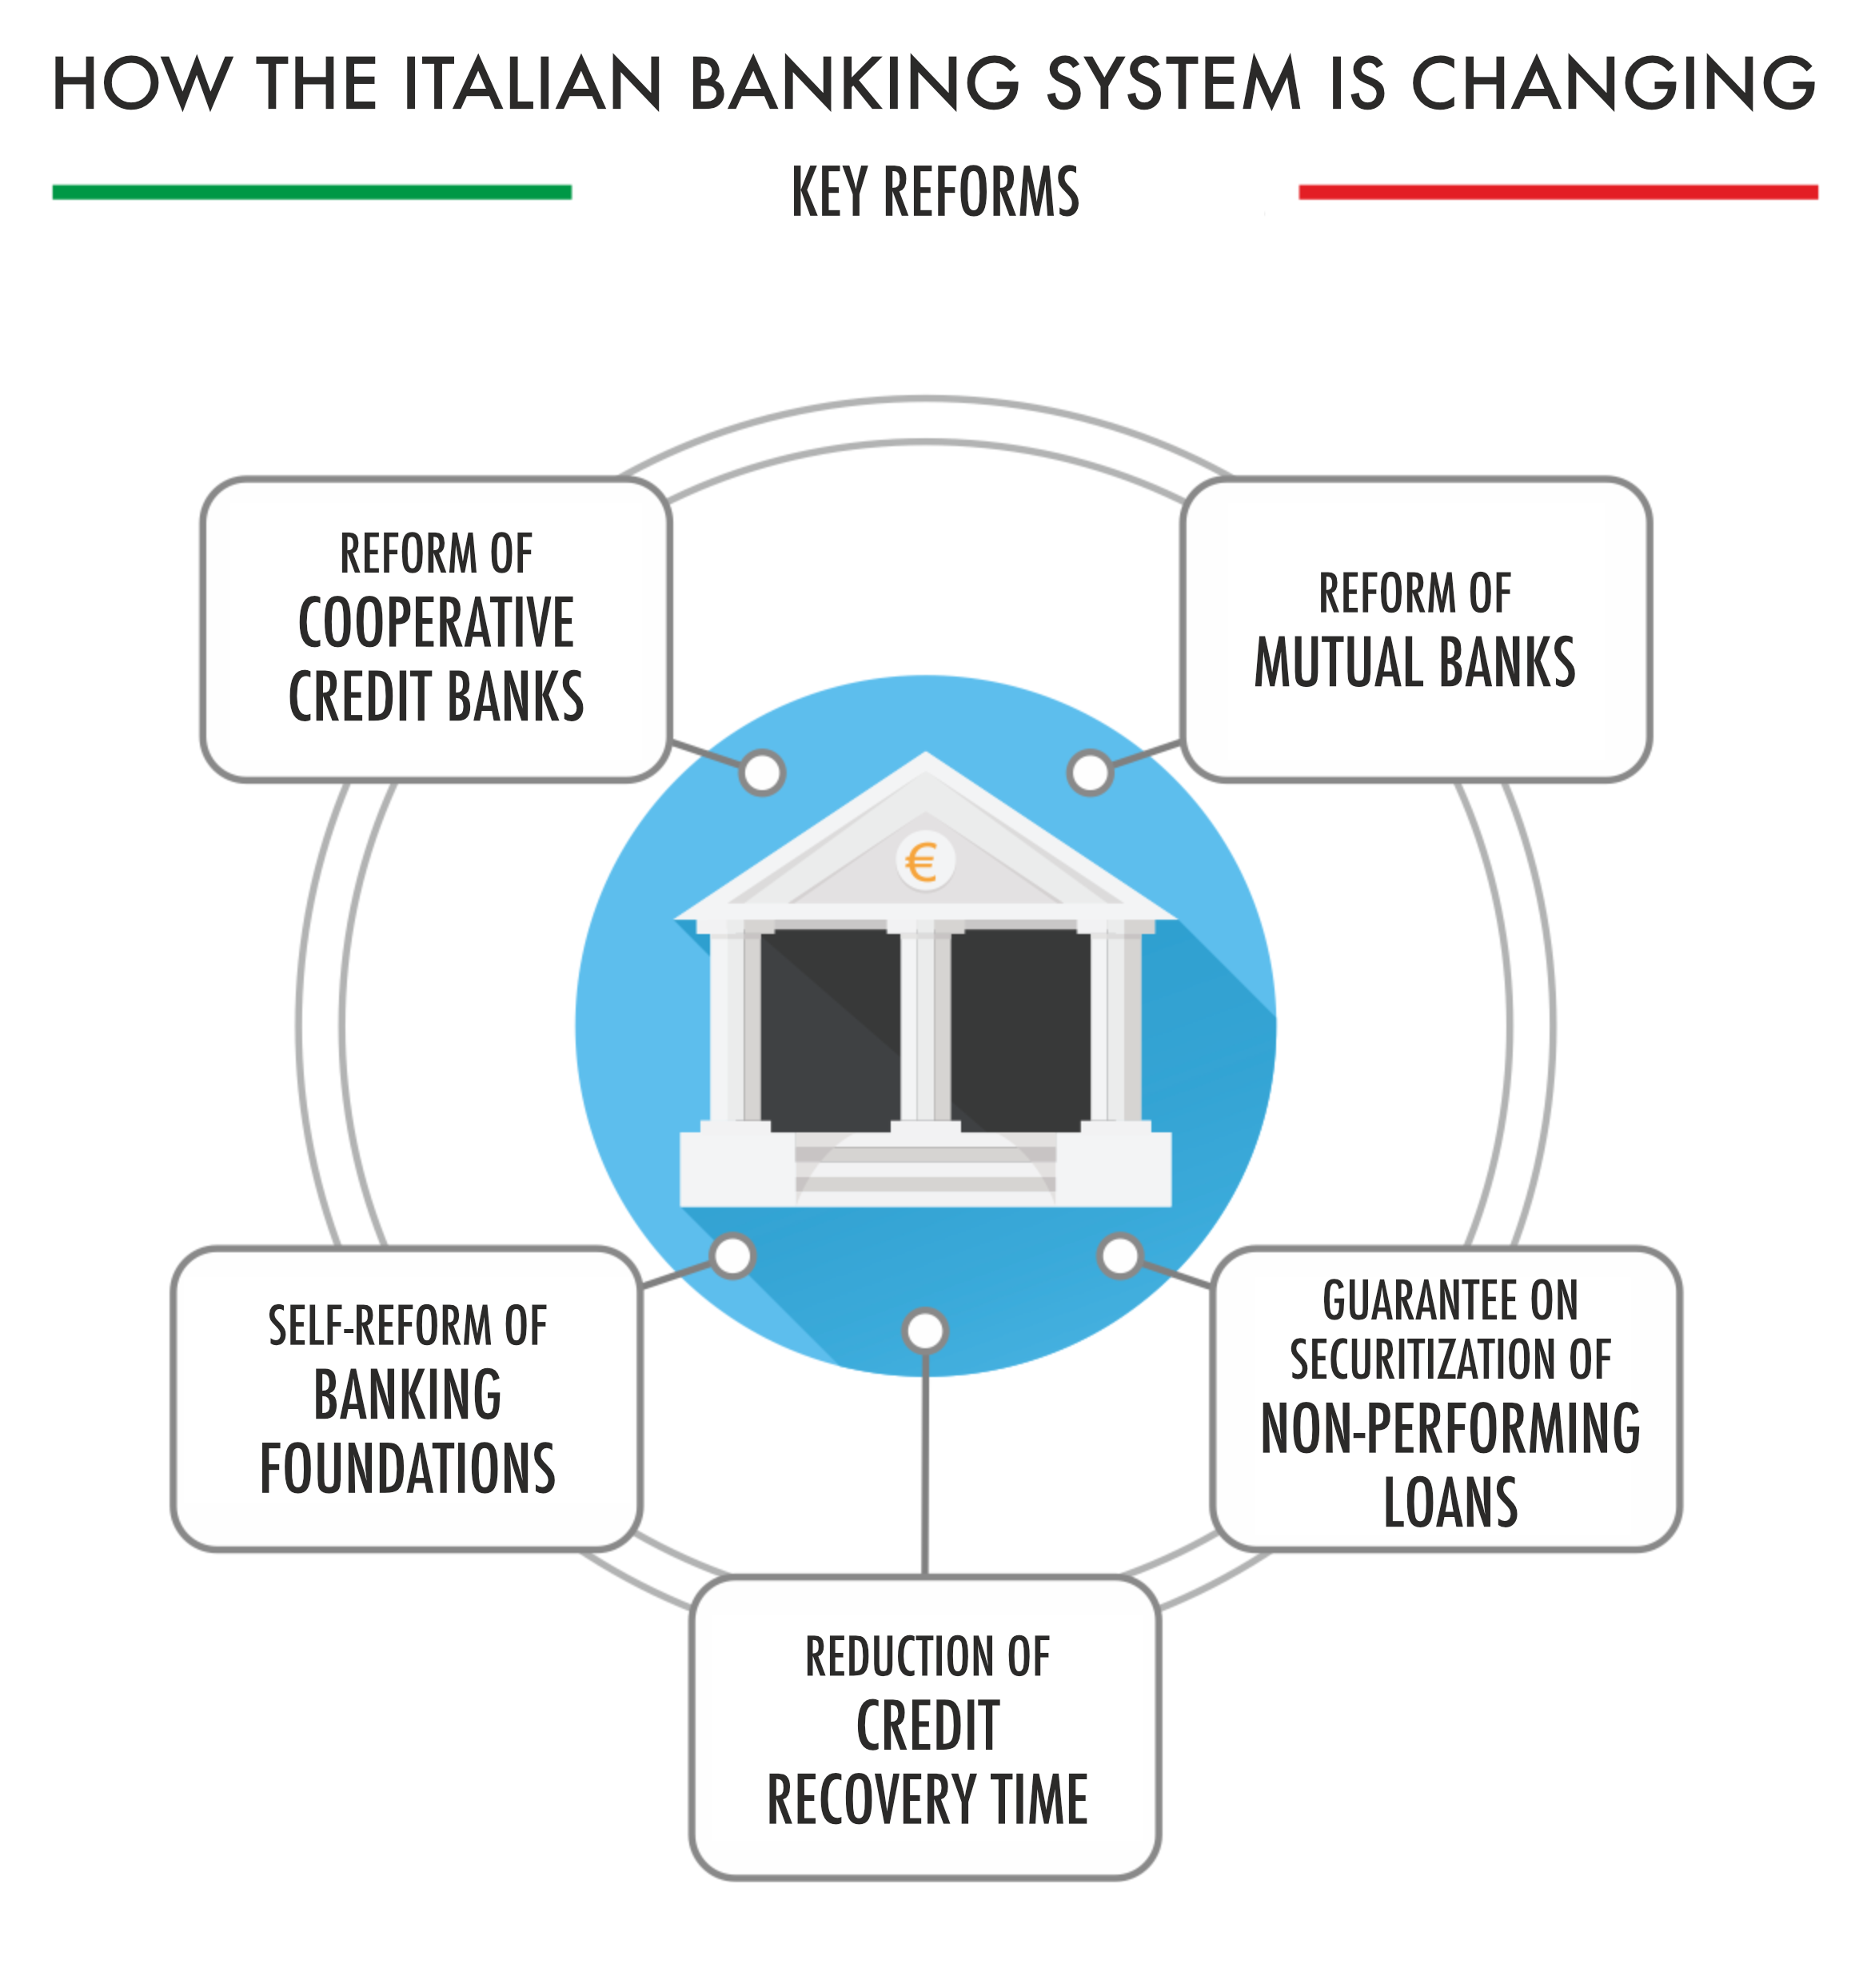 Italian banking system reforms